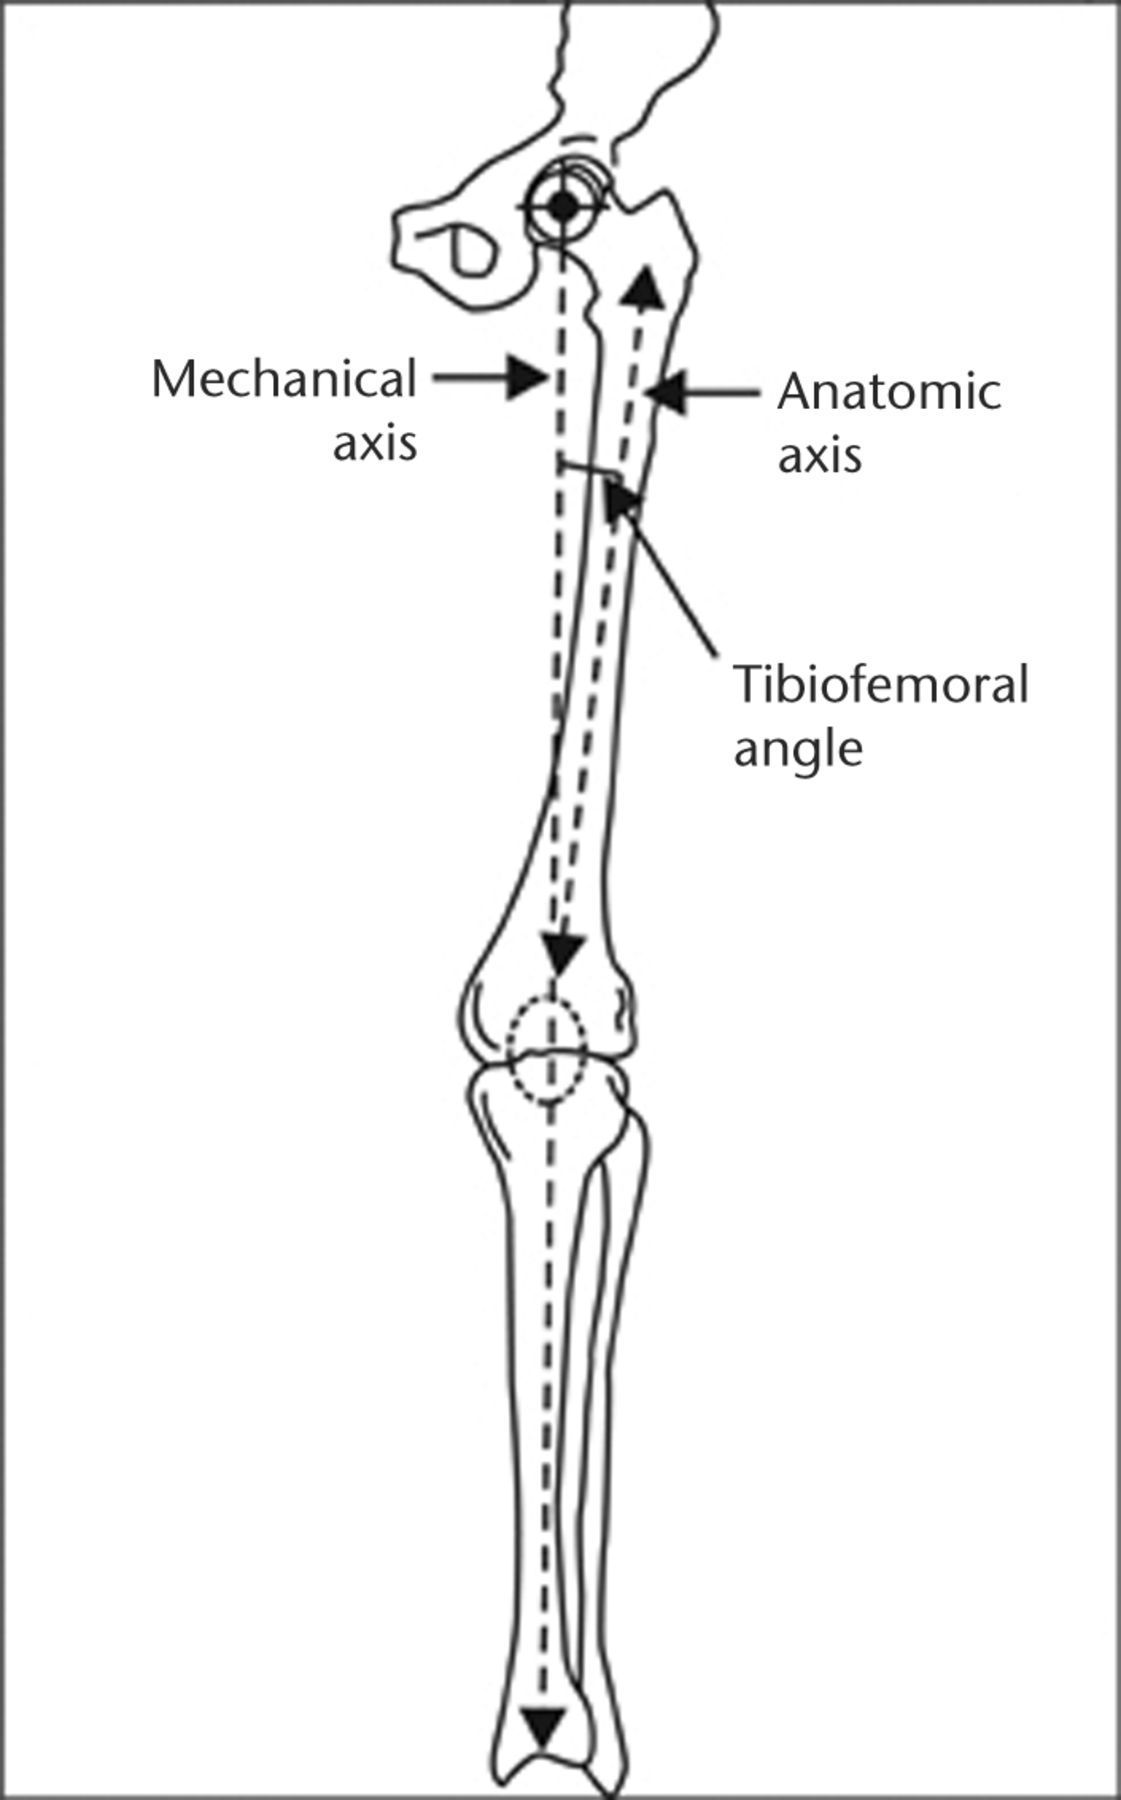 Fig. 2 
          The relationship between the mechanical and anatomic axis demonstrating the tibiofemoral angle.
        